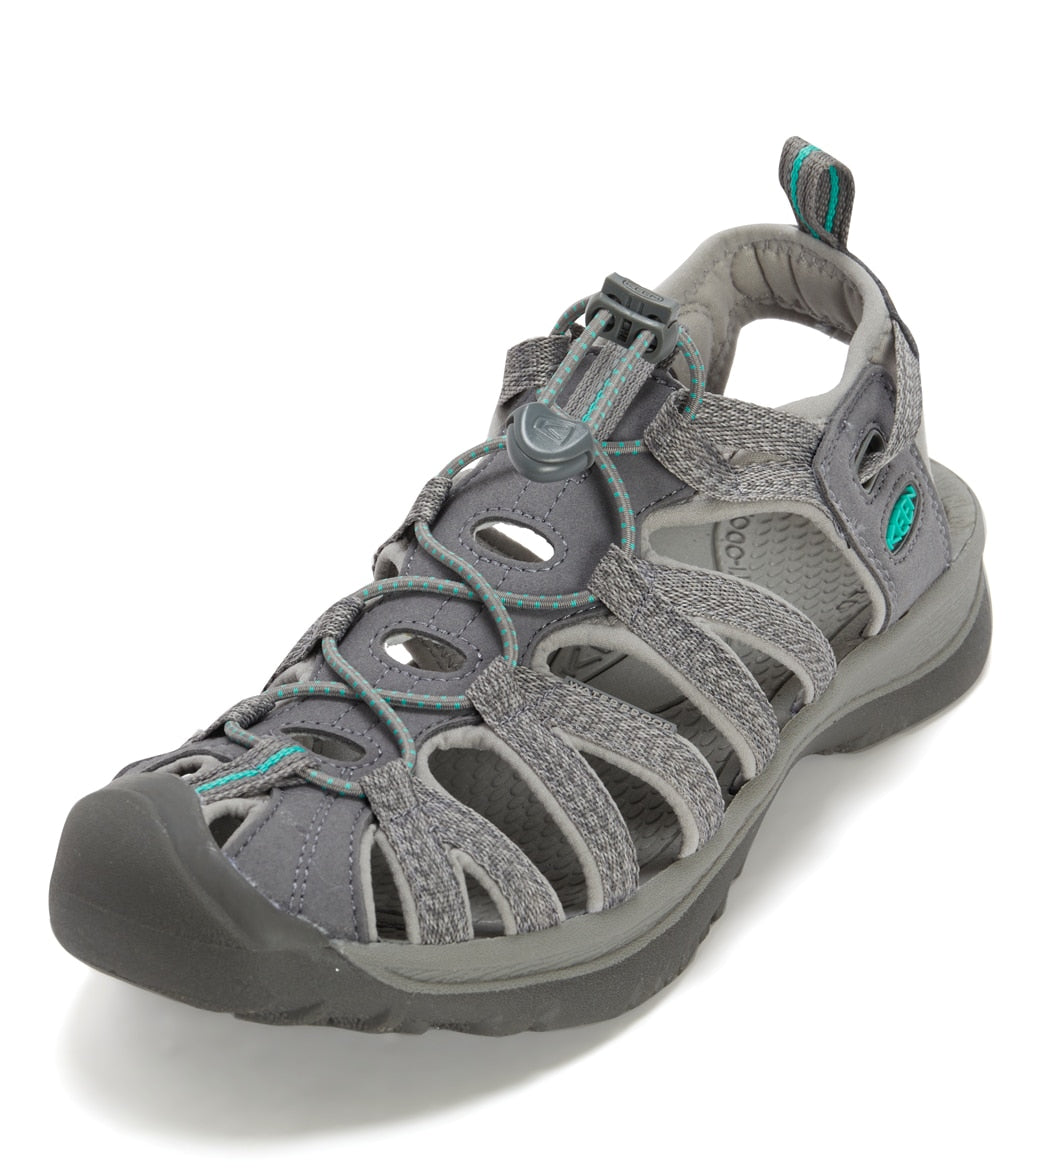 Keen Women's Whisper Water Shoes at